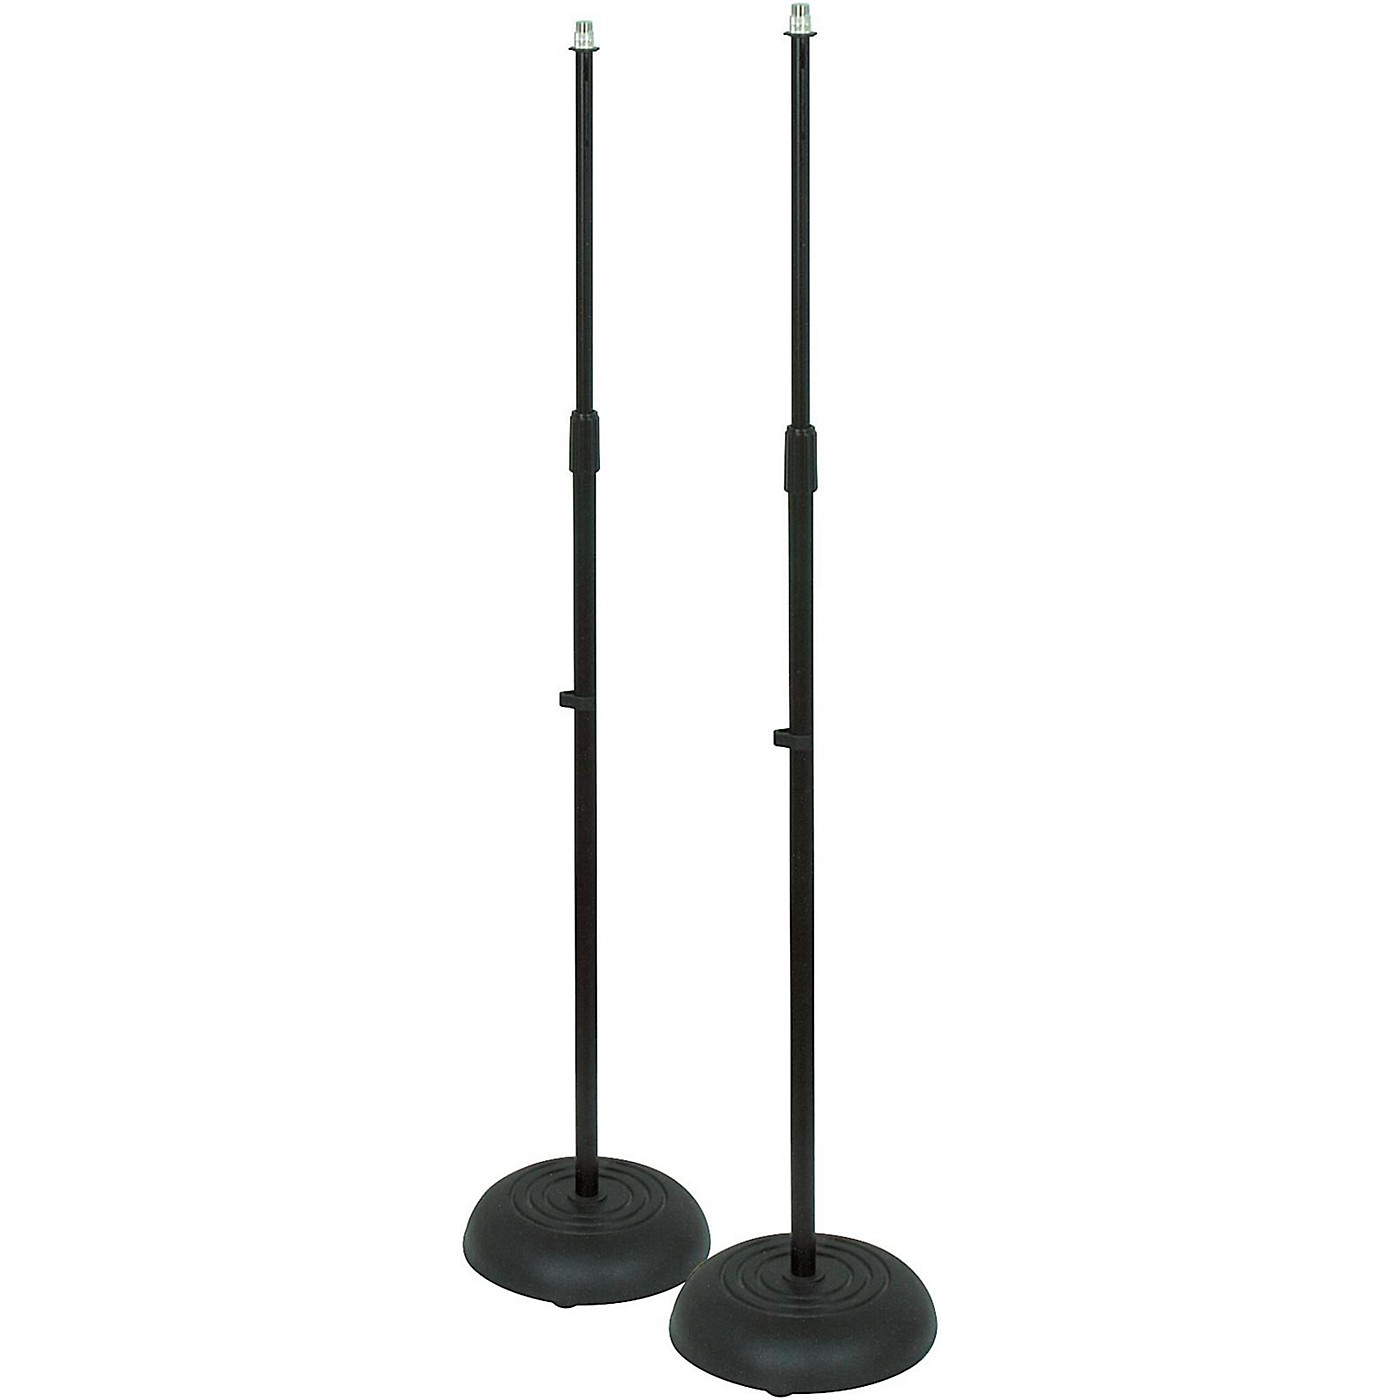 Musician's Gear Die-Cast Mic Stand 2-Pack thumbnail